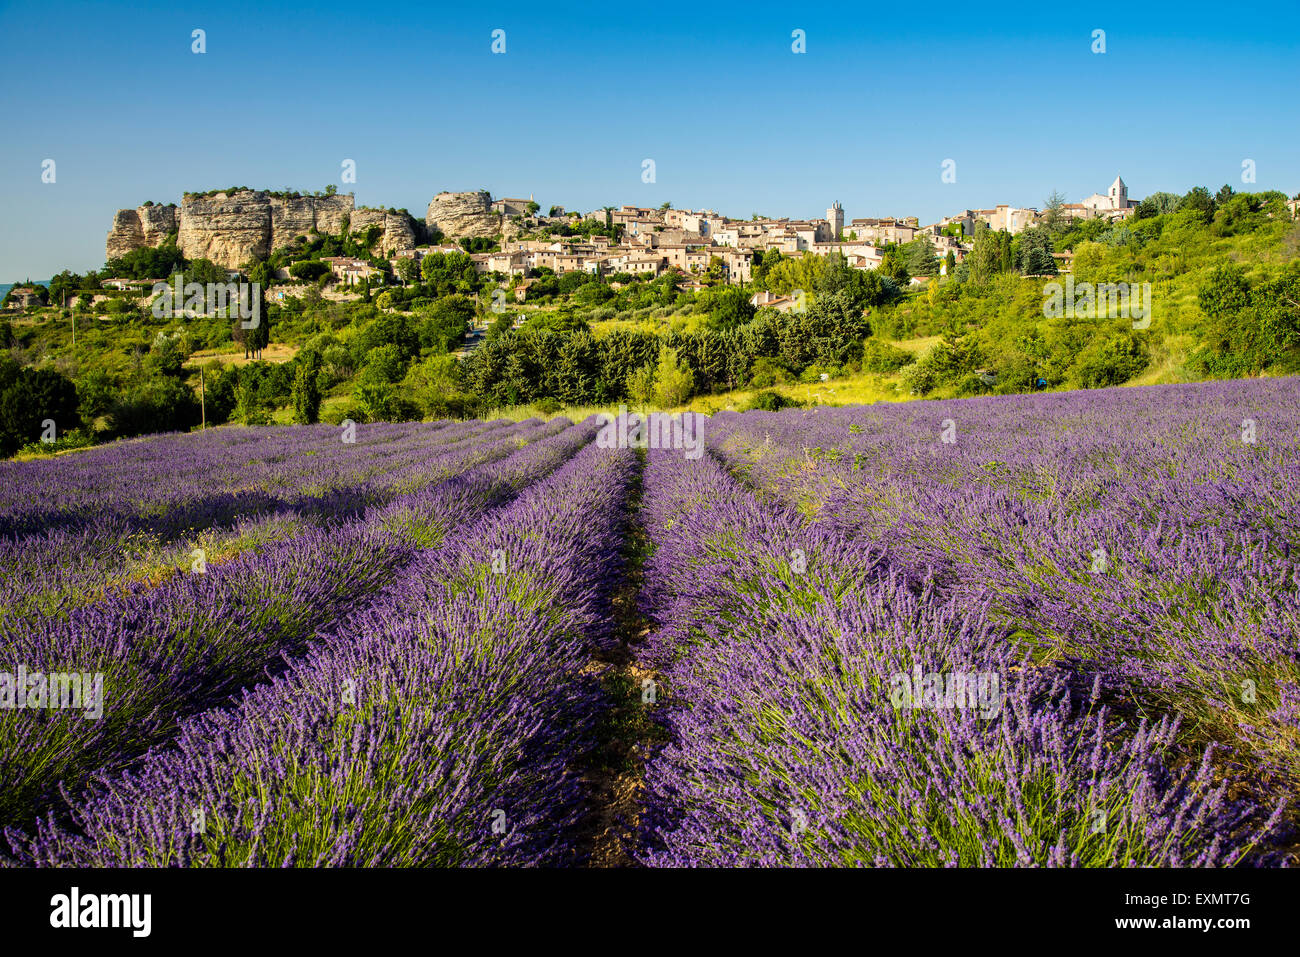 View of village of Saignon with field of lavander in bloom, Provence, France Stock Photo